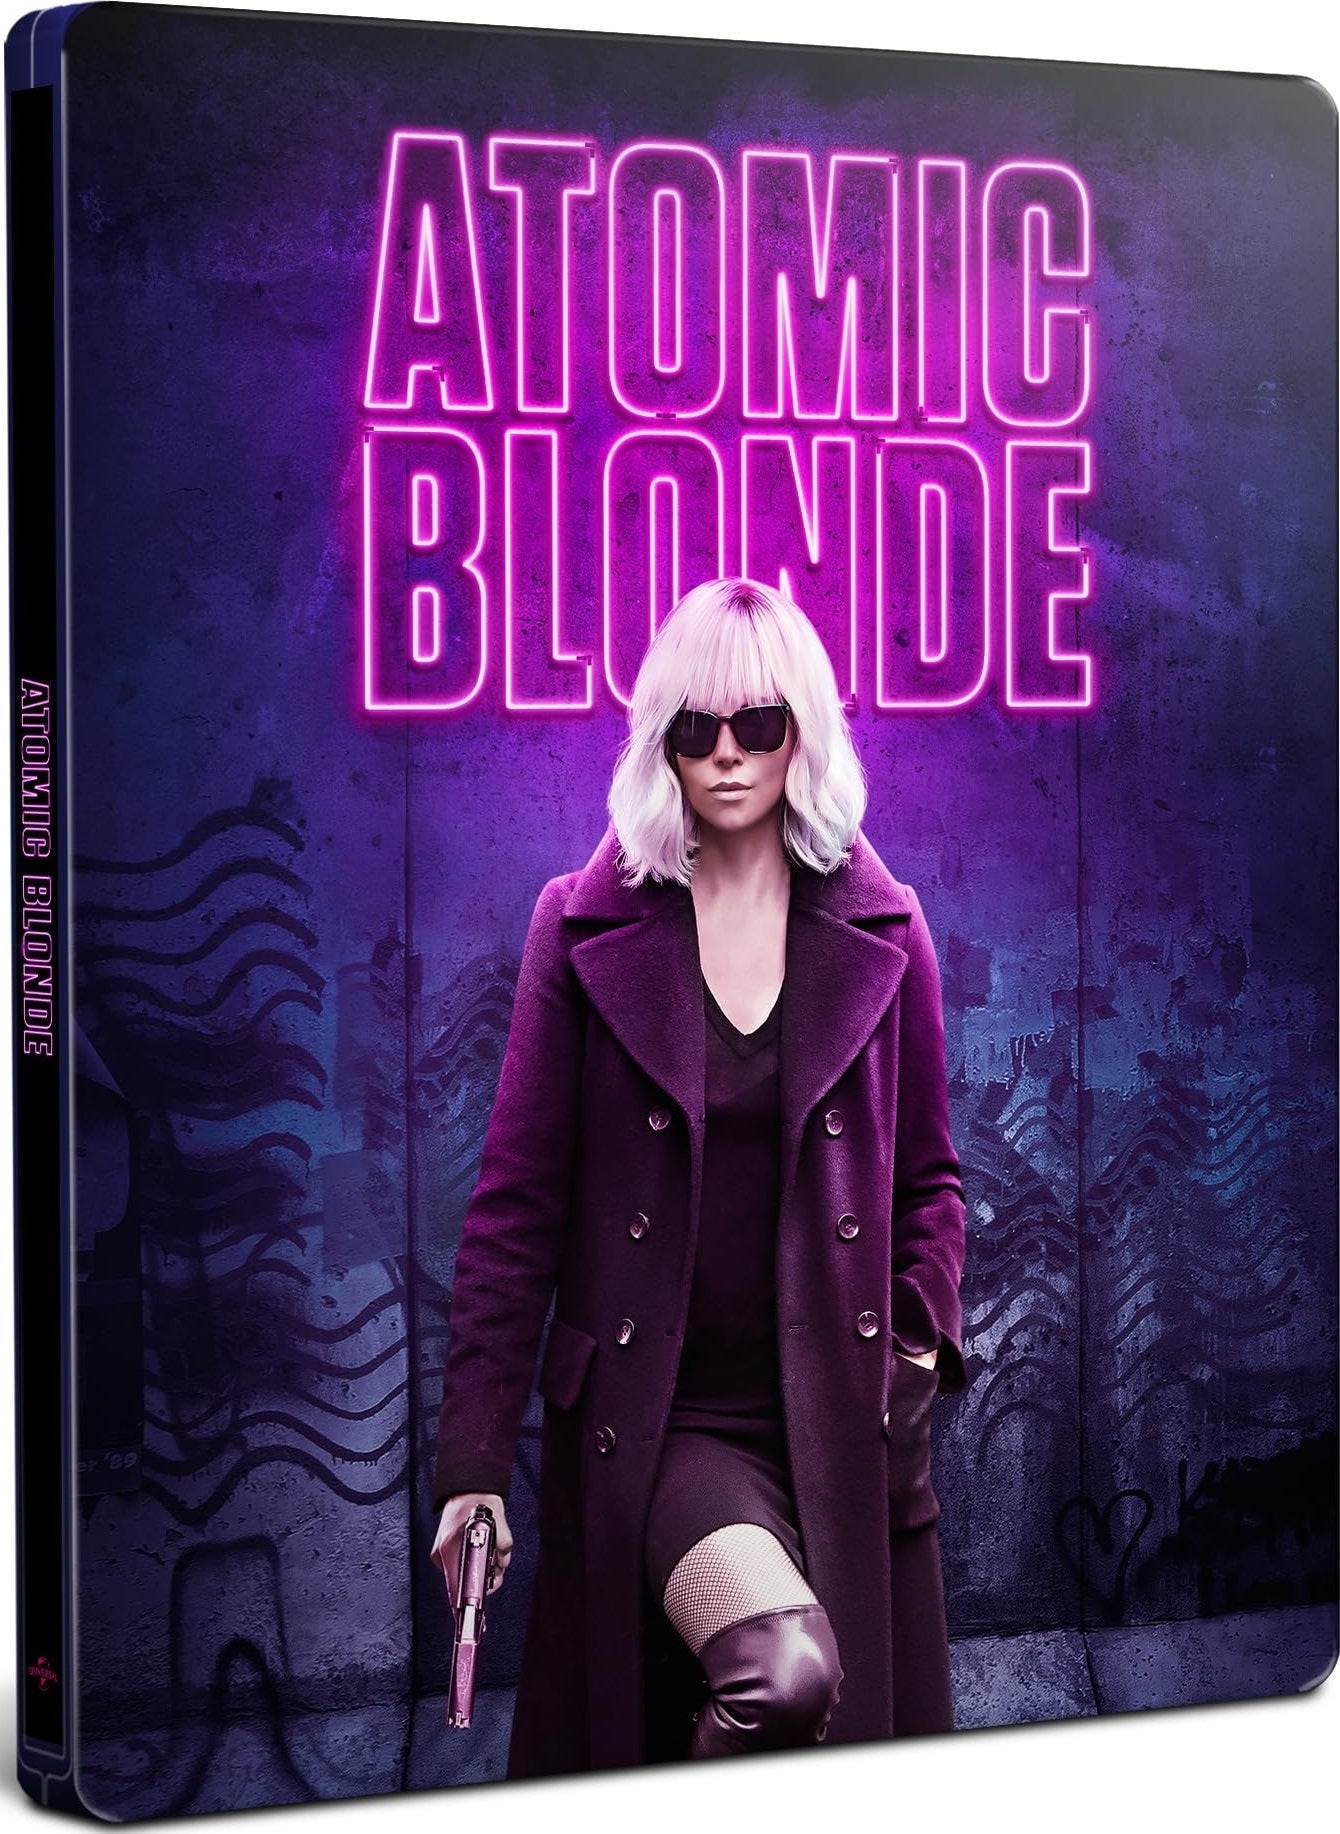 Atomic Blonde Limited Ultimate Collectors Edition [Steelbook] [4K UHD + Blu-ray] [UK]